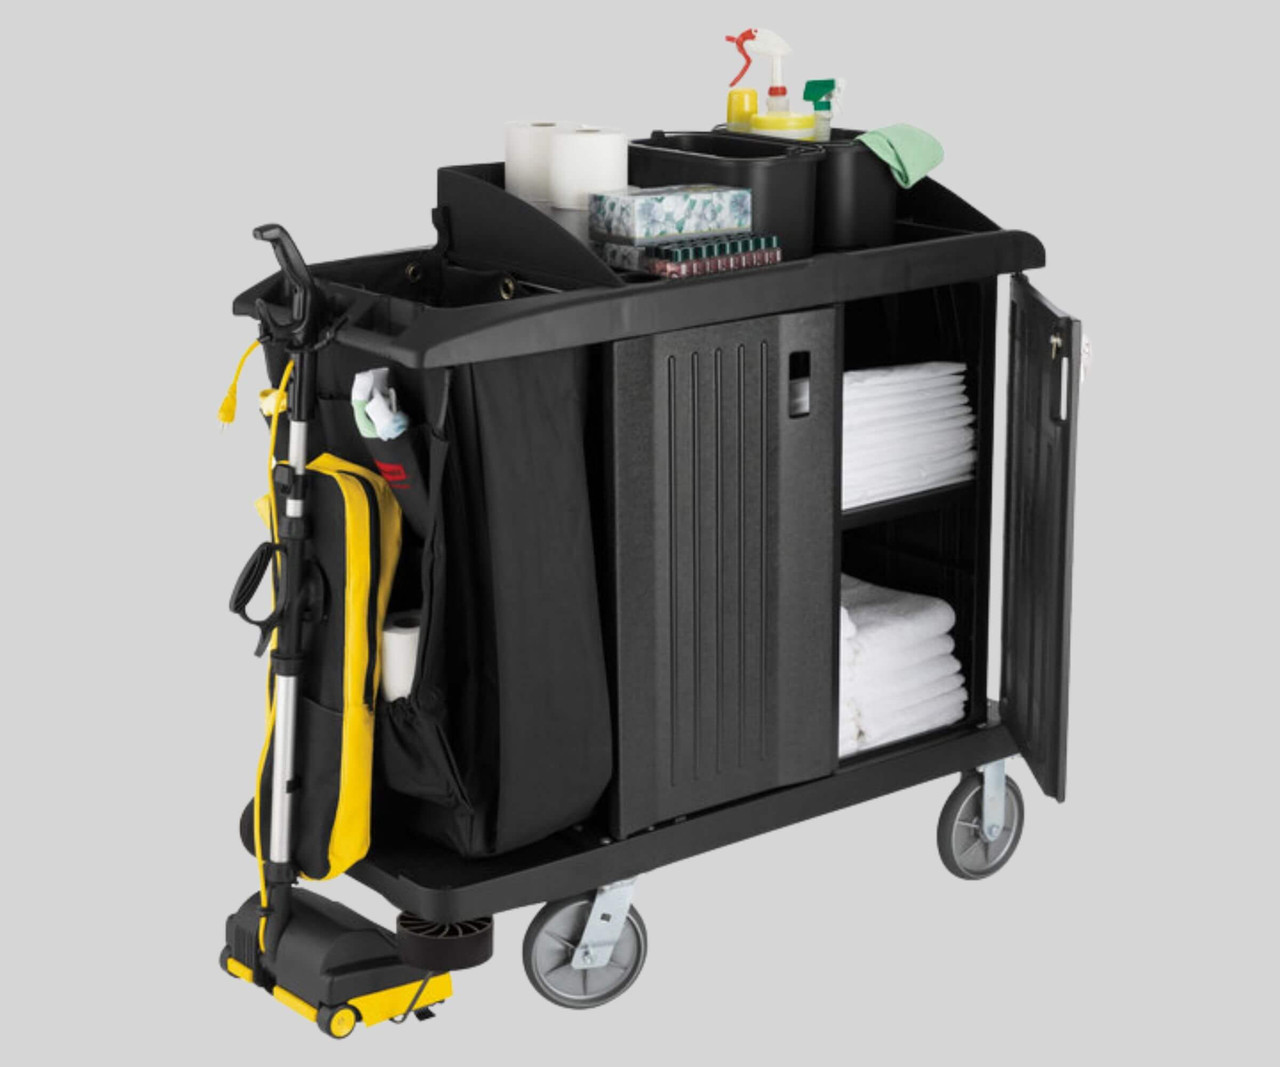 CP Janitorial Gray Cleaning Cart / Janitor Cart with 3 Shelves and Vinyl Bag - Efficient Cleaning and Organization-Chicken Pieces